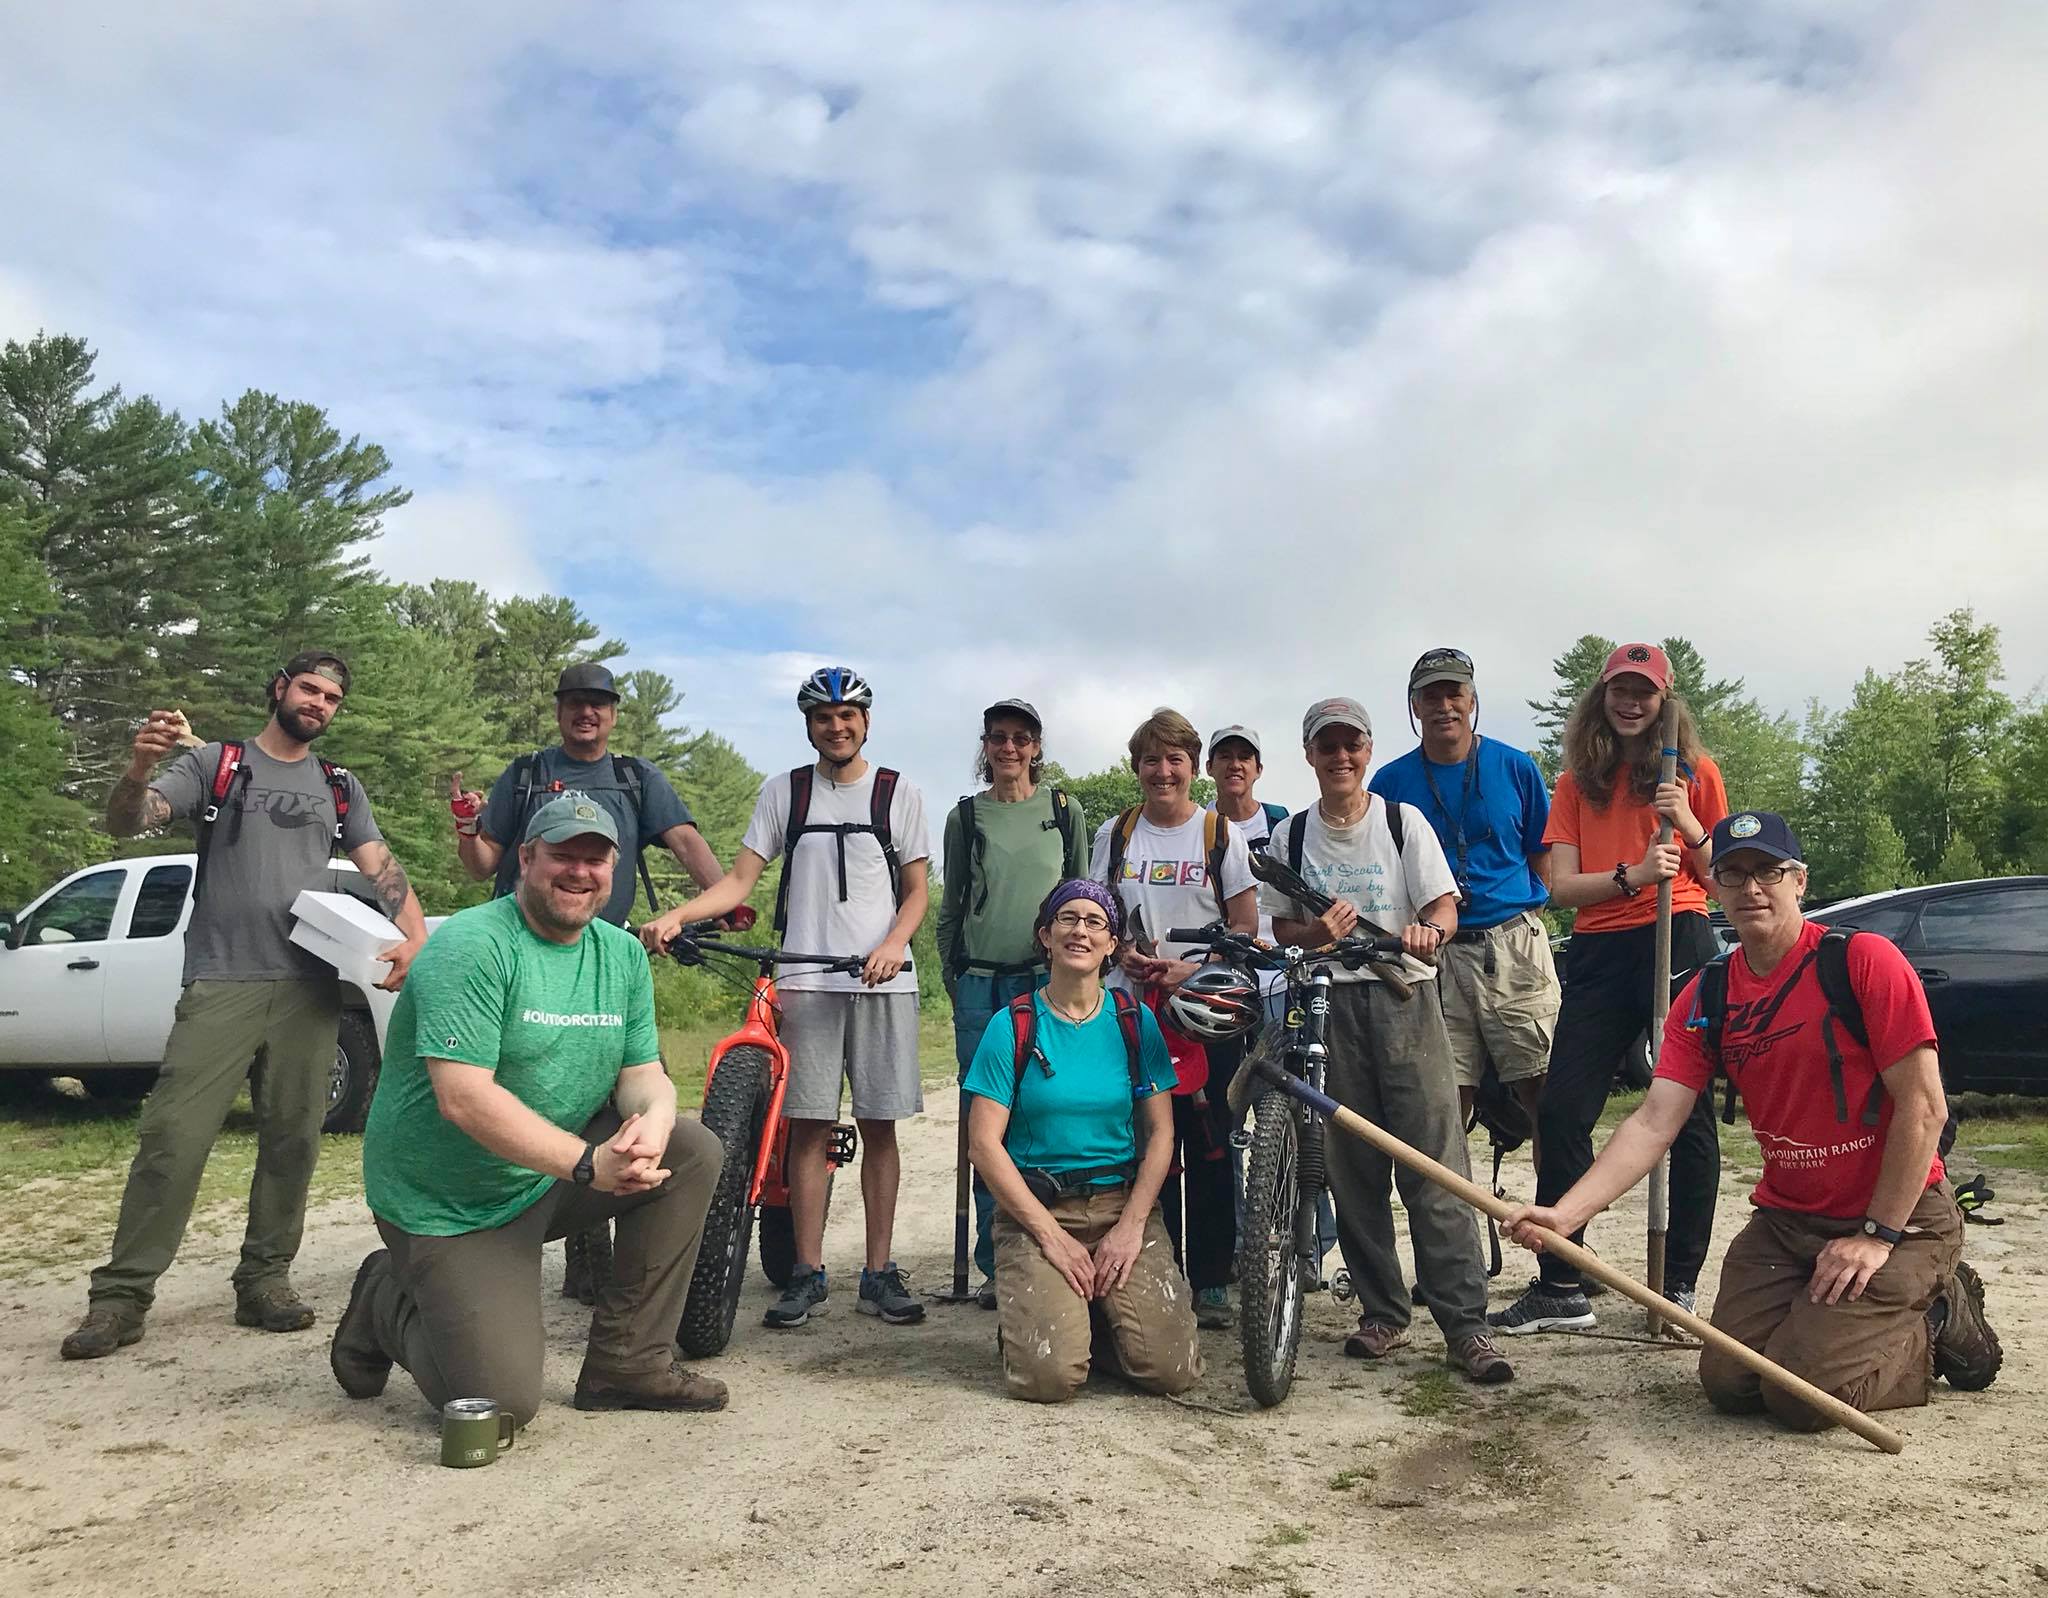 A trail crew poses for a photo with tools and bikes